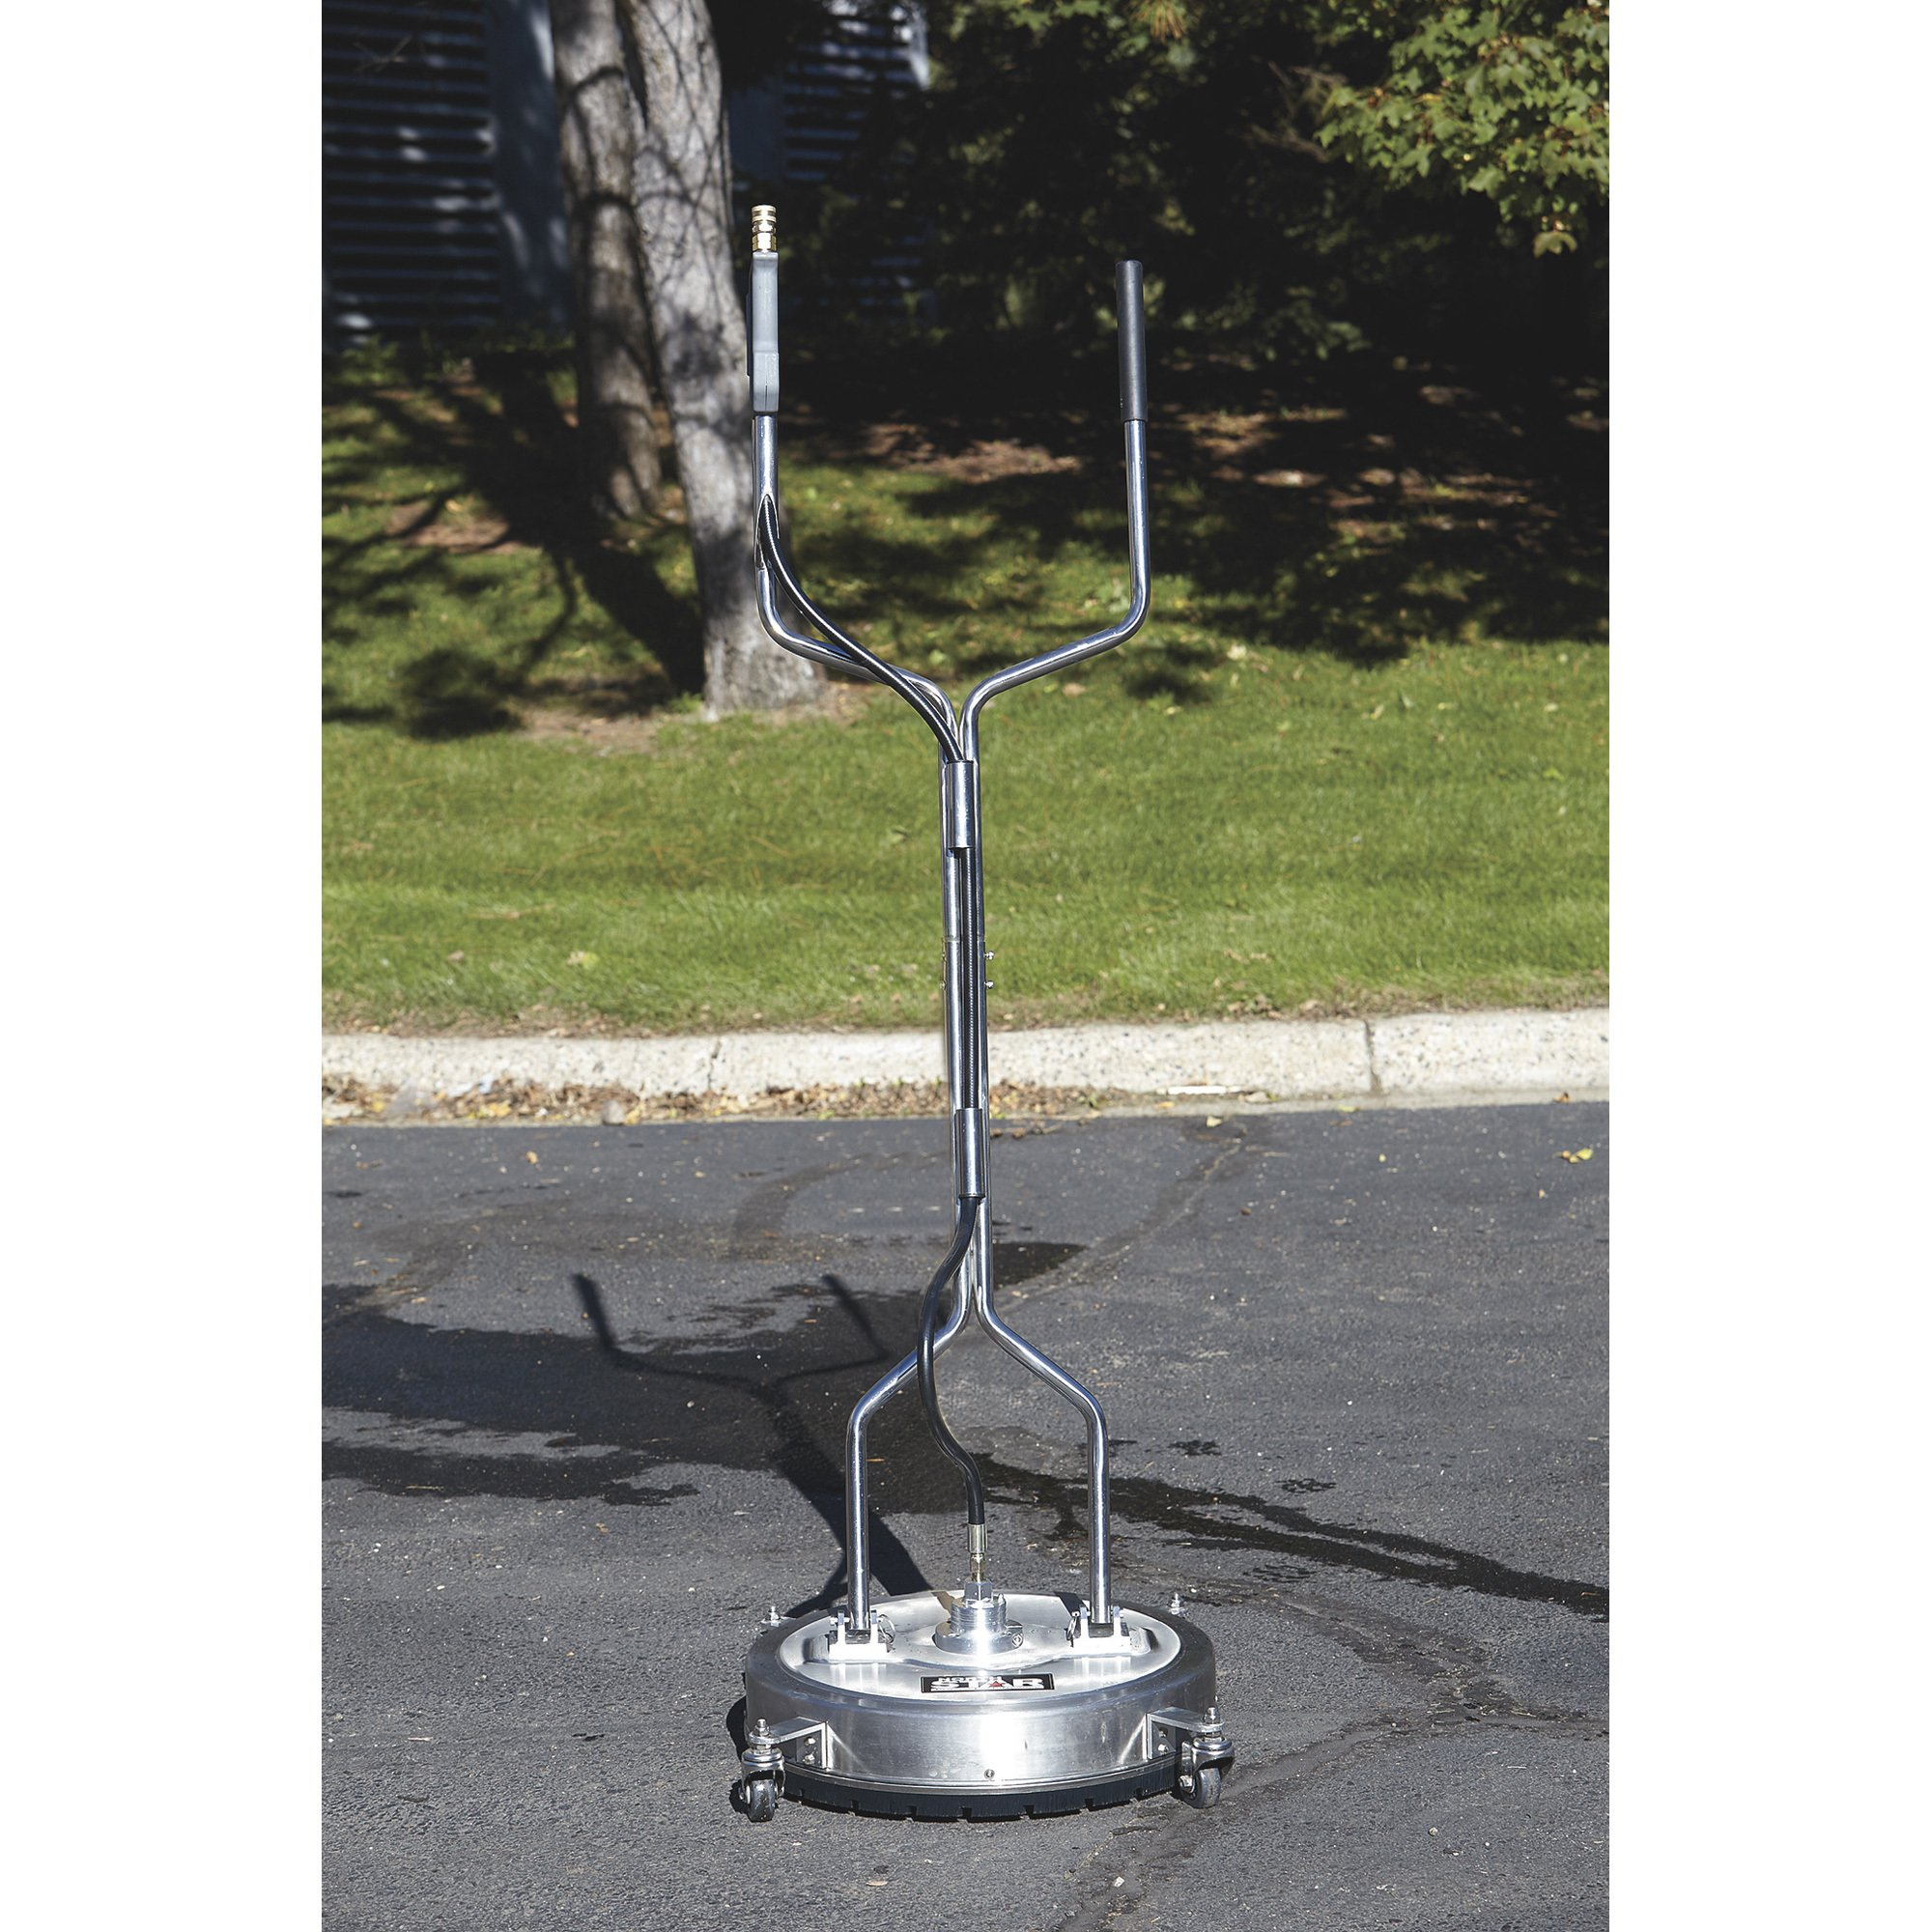 NorthStar, NorthStar 49430 Pressure Washer 22" Surface Cleaner 4000 PSI 8.0 GPM Stainless Steel with Casters New